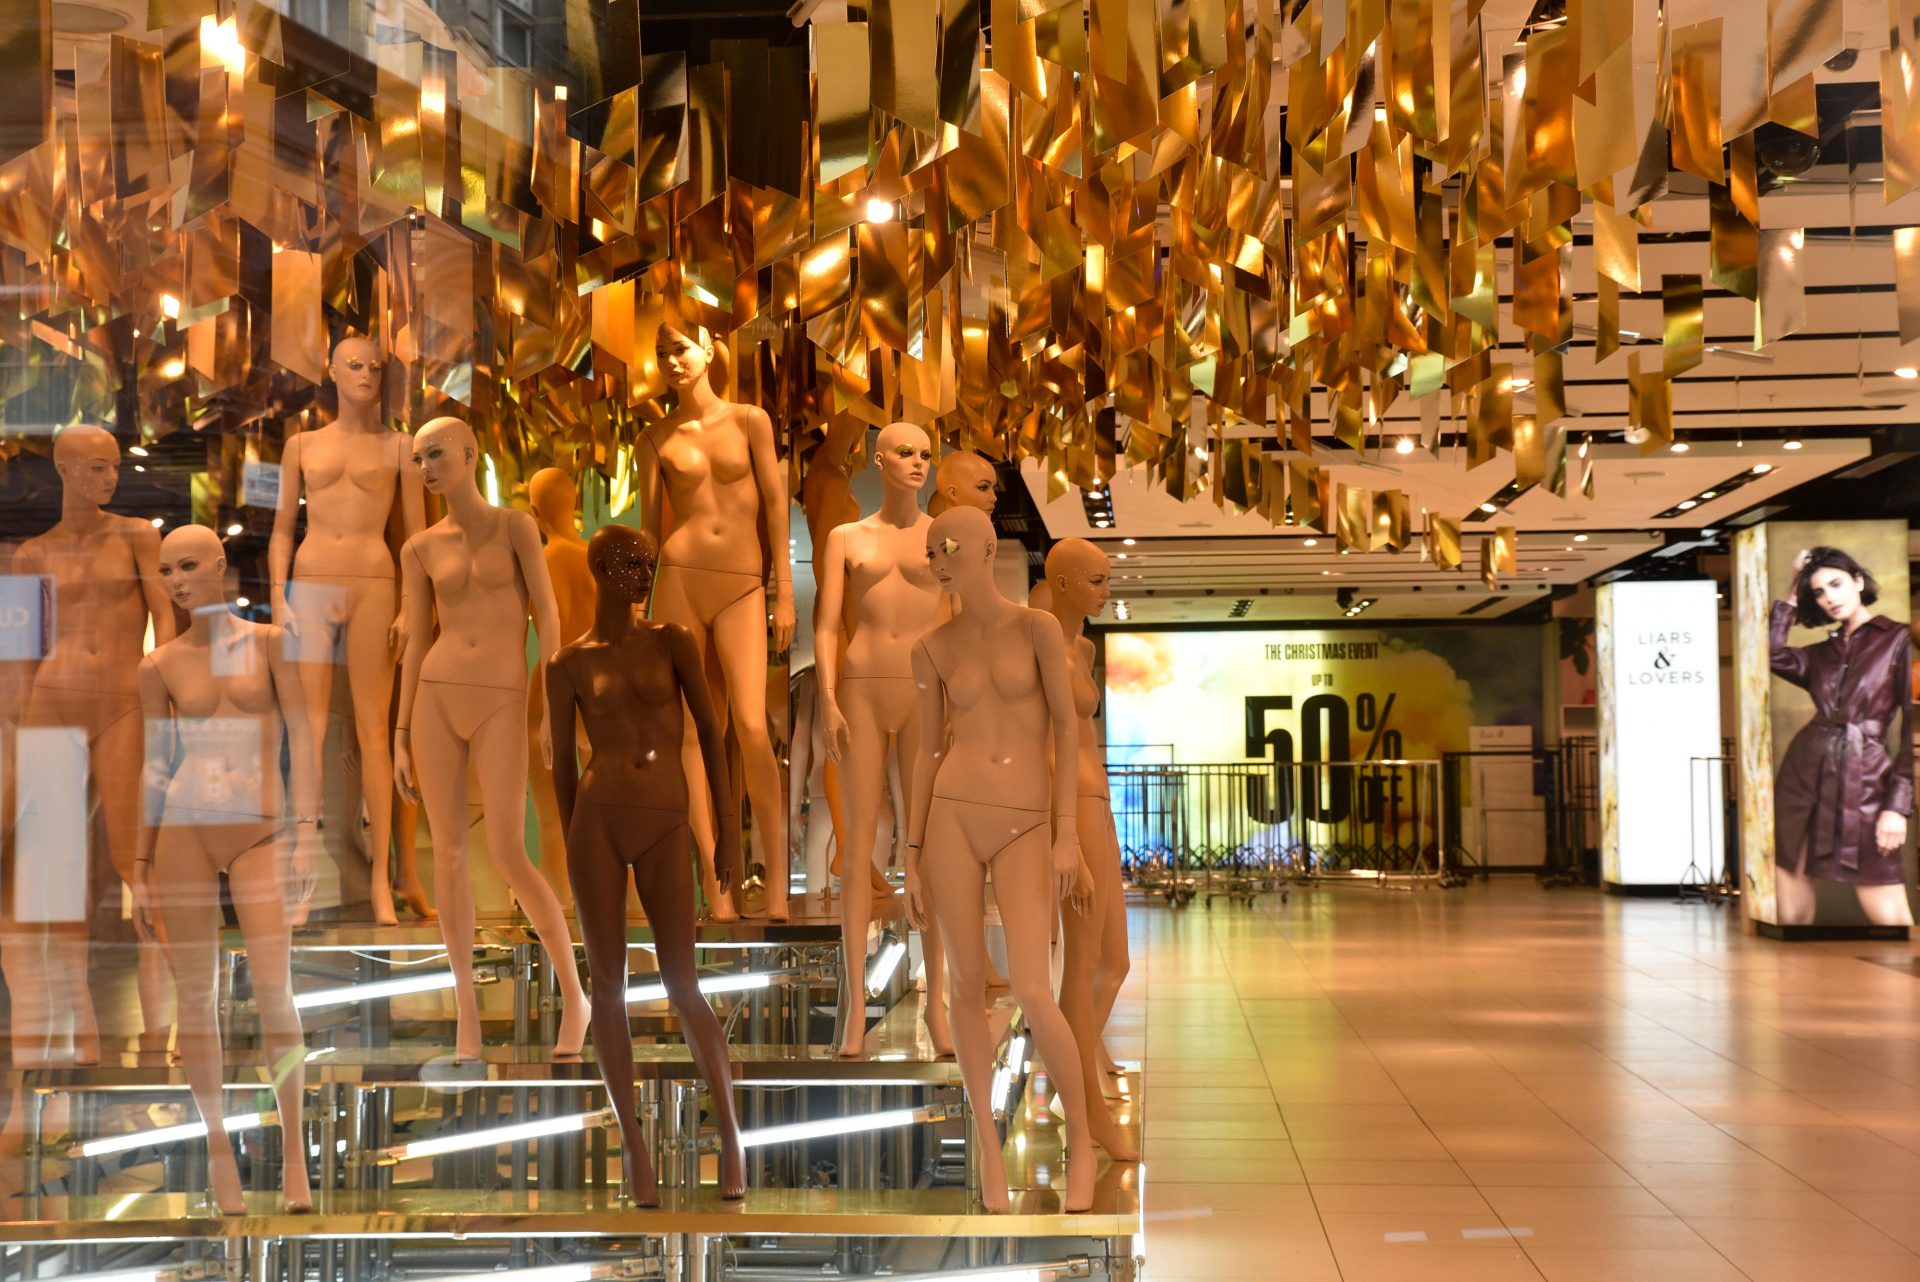 Showroom dummies at the closed Topshop store on London’s Oxford Street. Photo: Matthew Chattle via Getty.